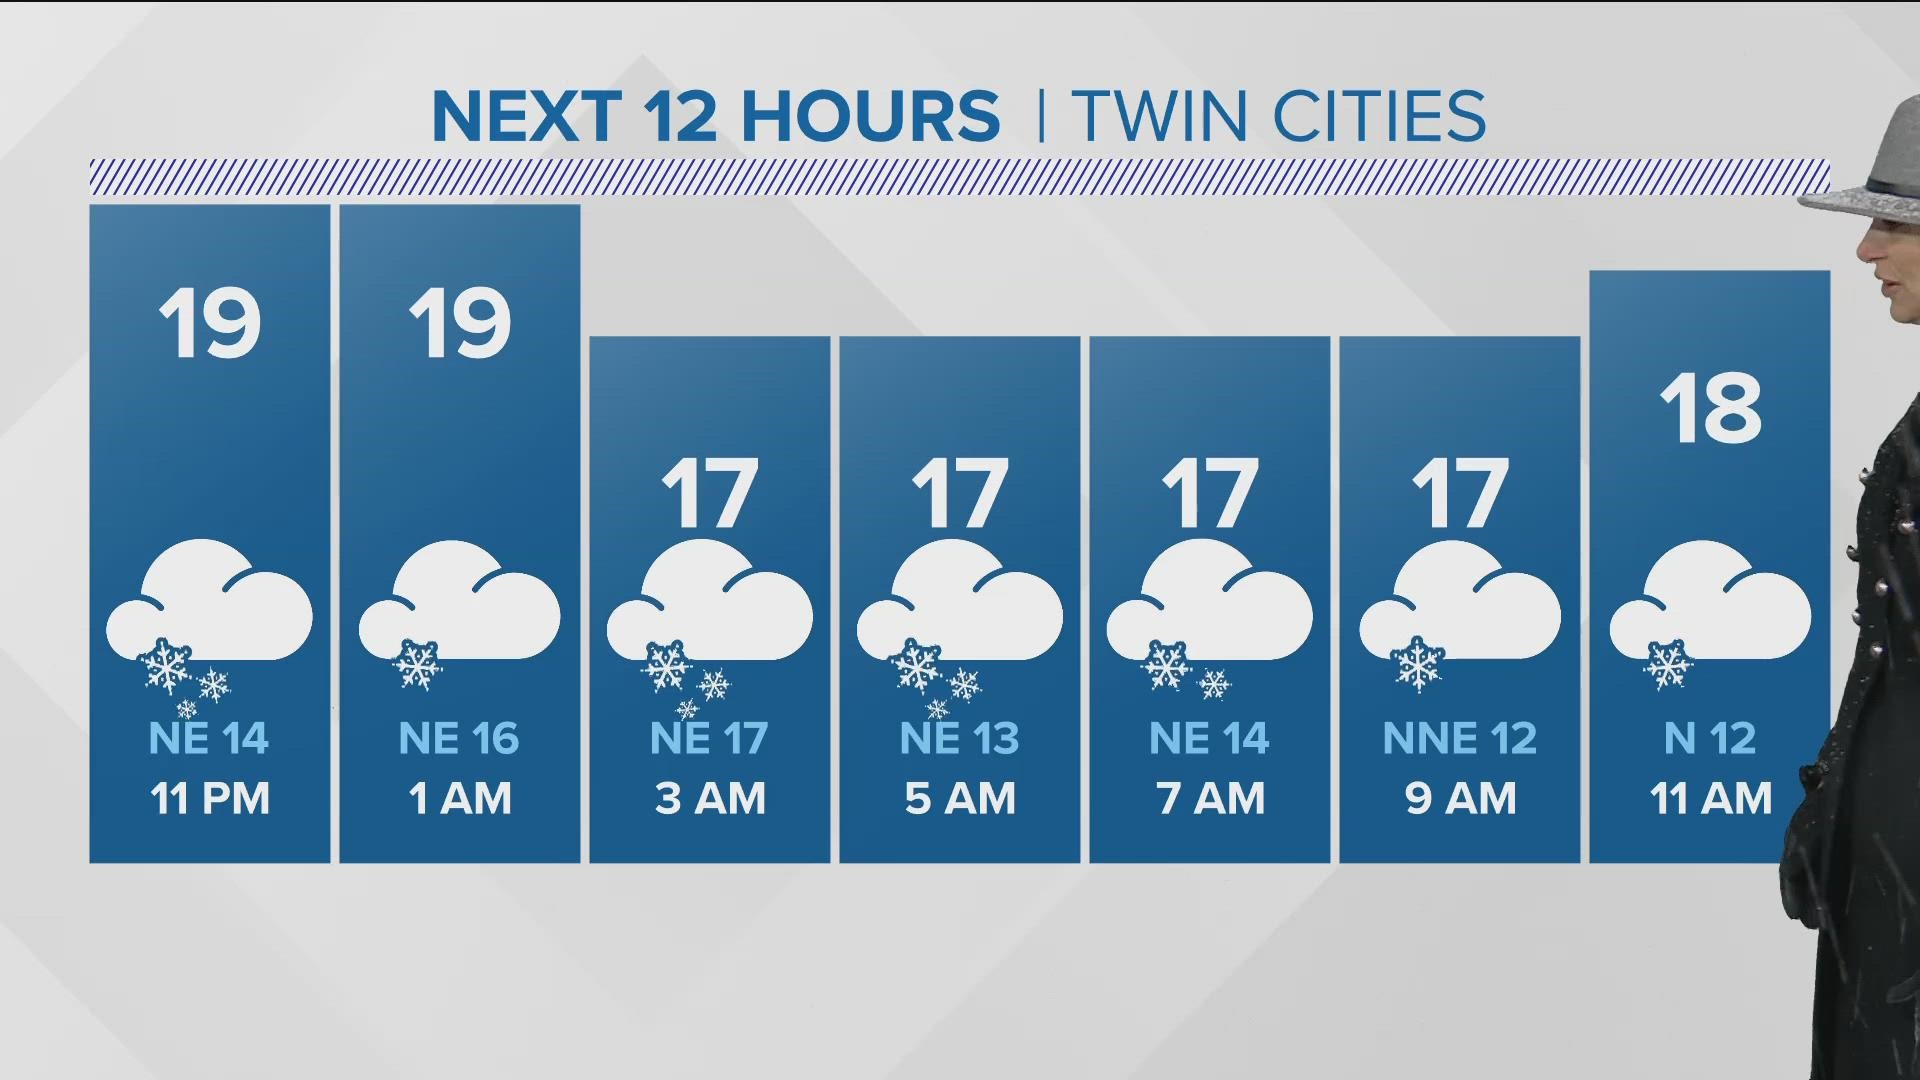 KARE 11's team coverage provides a look at how the winter storm is impacting the Twin Cities.